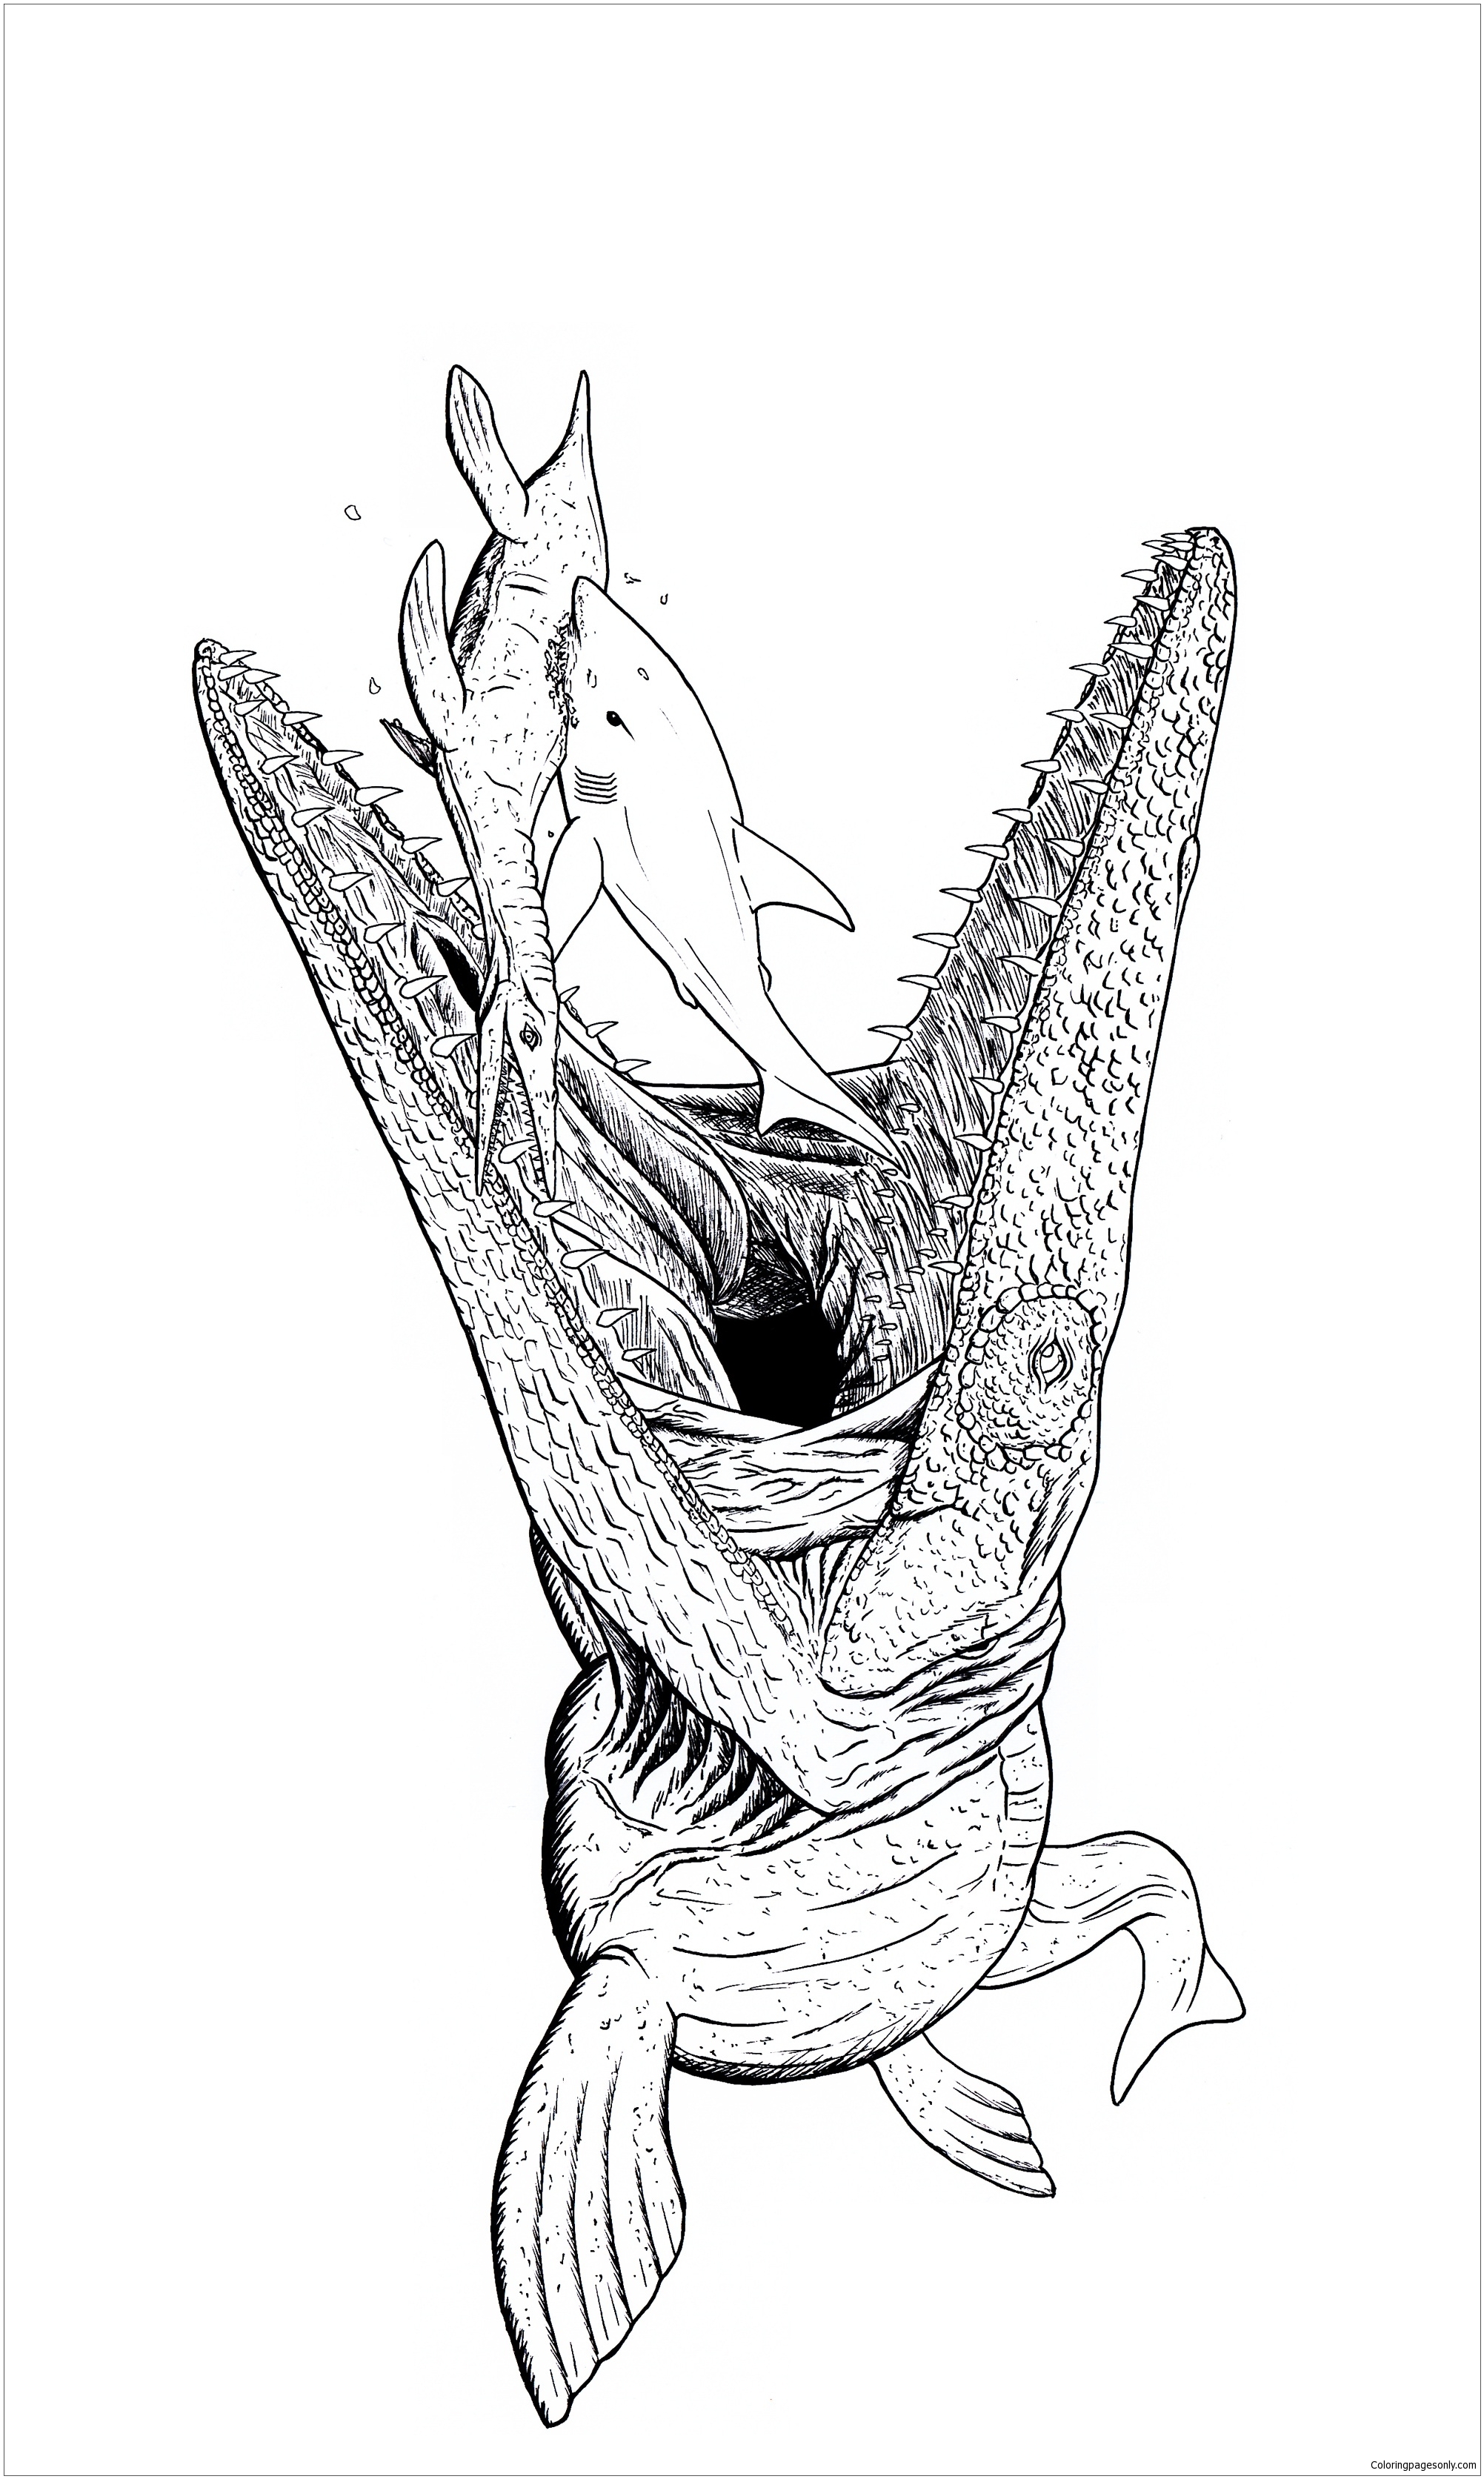 Mosasaurus 1 Coloring Page - Free Coloring Pages Online